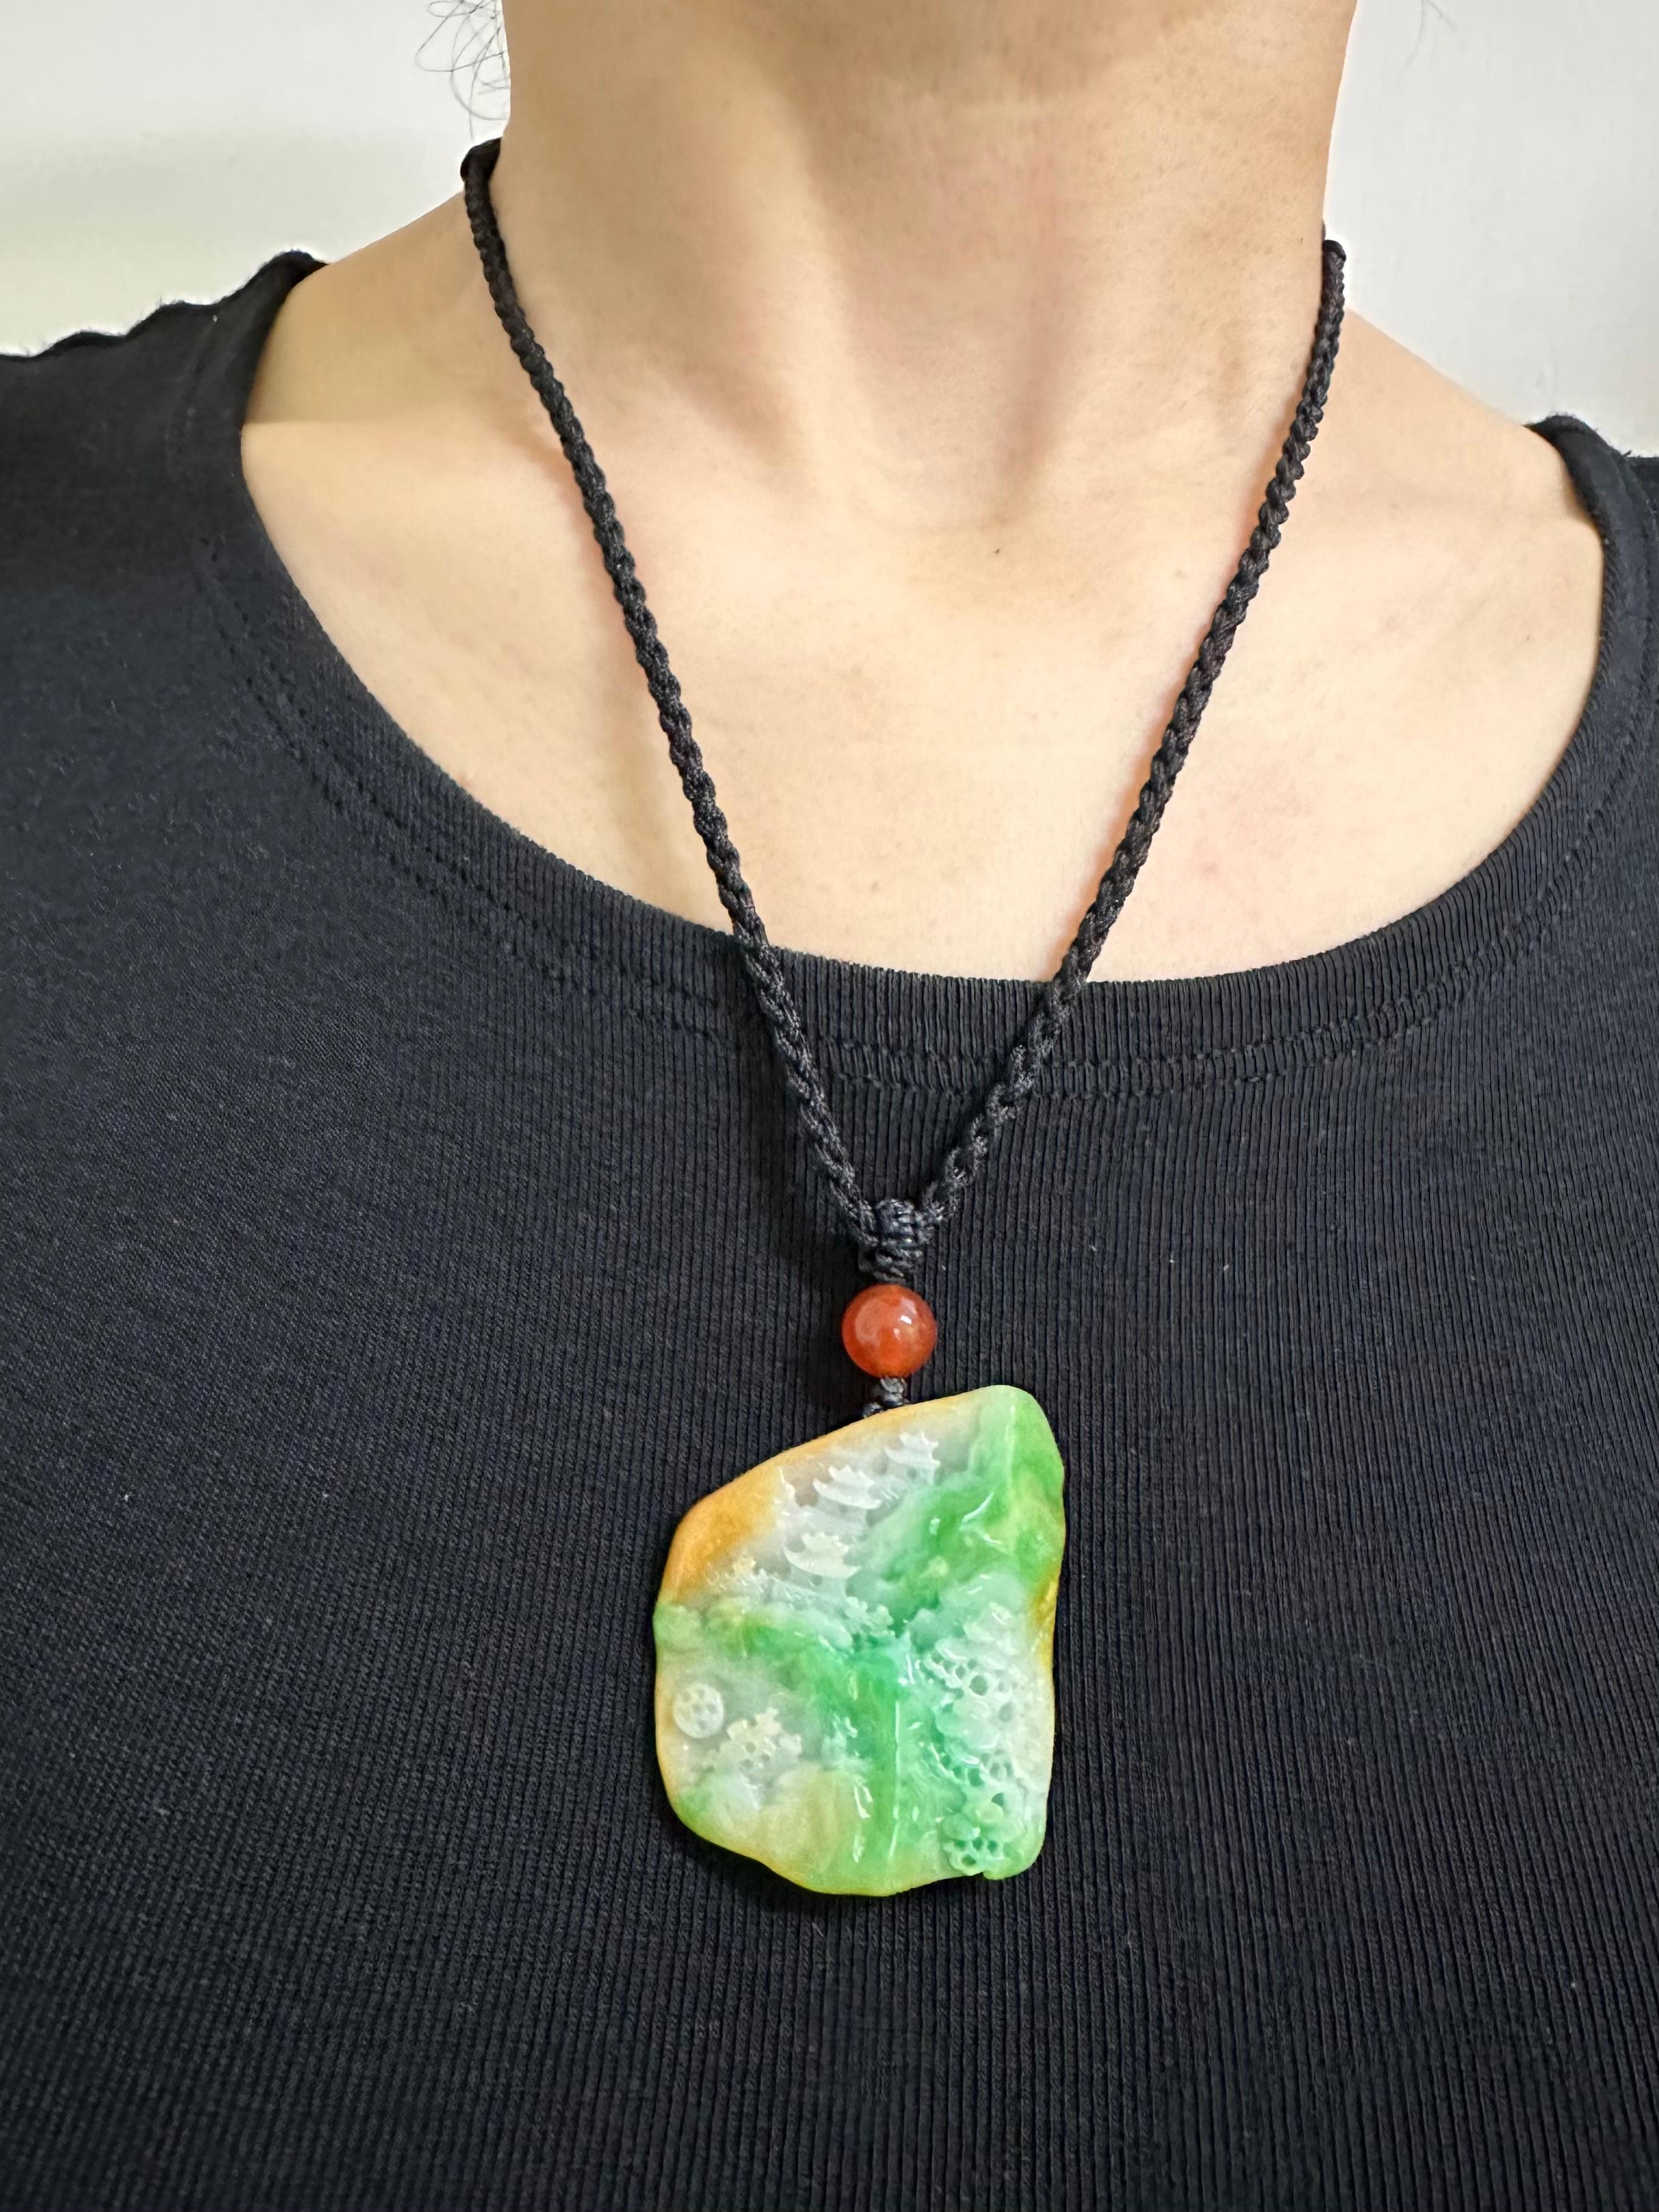 Women's or Men's Certified Natural Multi Color Jade & Agate Pendant Necklace Exquisite Carving For Sale